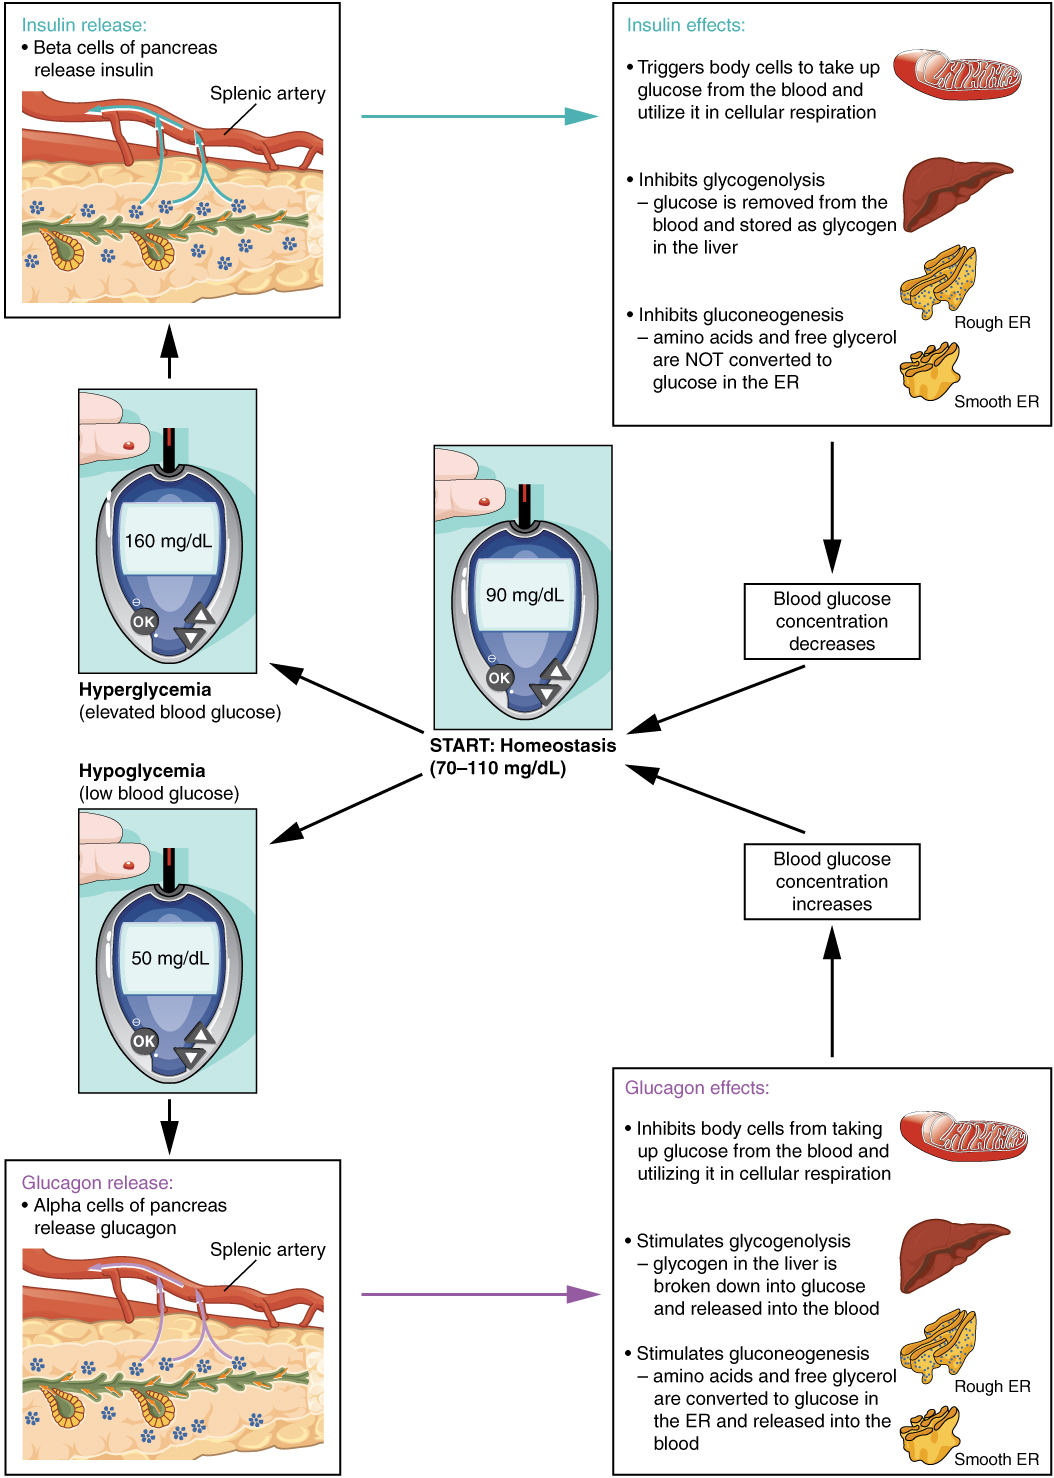 This diagram shows the homeostatic regulation of blood glucose levels. Blood glucose concentration is tightly maintained between 70 milligrams per deciliter and 110 milligrams per deciliter. If blood glucose concentration rises above this range (hyperglycemia), insulin is released from the pancreas. Insulin triggers body cells to take up glucose from the blood and utilize it in cellular respiration. Insulin also inhibits glycogenolysis, in that glucose is removed from the blood and stored as glycogen in the liver. Insulin also inhibits gluconeogenesis, in that amino acids and free glycerol are not converted to glucose in the ER. If blood glucose concentration drops below this range, glucagon is released, which stimulates body cells to release glucose into the blood. All of these actions cause blood glucose concentration to decrease. When blood glucose concentration is low (hypoglycemia), alpha cells of the pancreas release glucagon. Glucagon inhibits body cells from taking up glucose from the blood and utilizing it in cellular respiration. Glucagon also stimulates glycogenolysis, in that glycogen in the liver is broken down into glucose and released into the blood. Glucagon also stimulates glucogenogenesis, in that amino acids and free glycerol are converted to glucose in the ER and released into the blood. All of these actions cause blood glucose concentrations to increase.